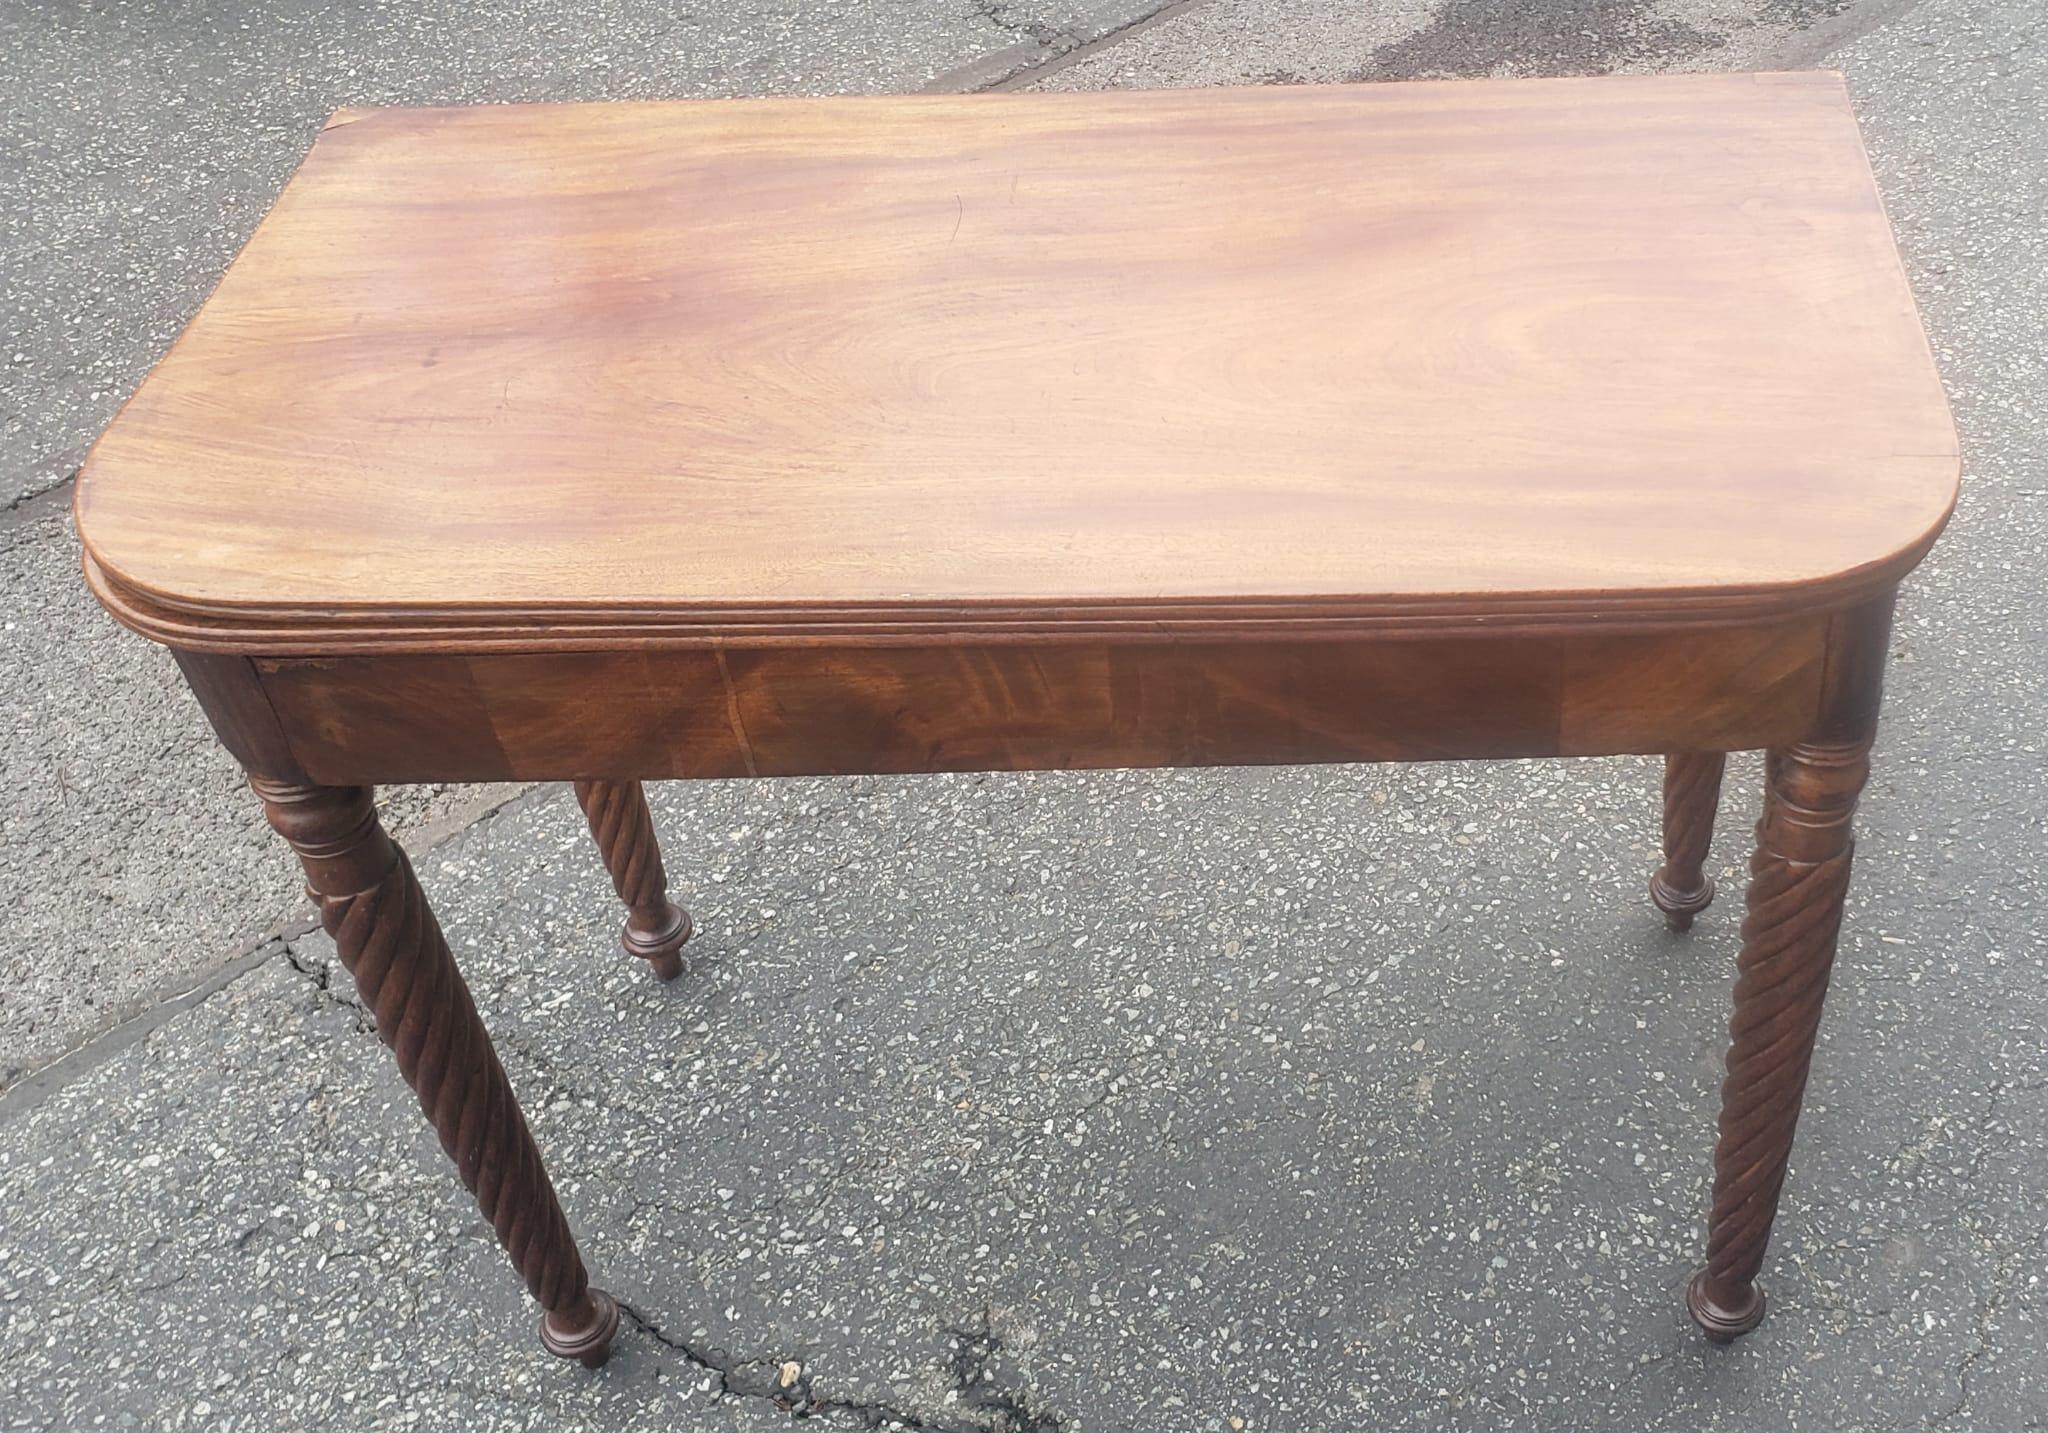 19th Century Empire Style Mahogany Fold-Top Game Table or Console Table In Good Condition For Sale In Germantown, MD